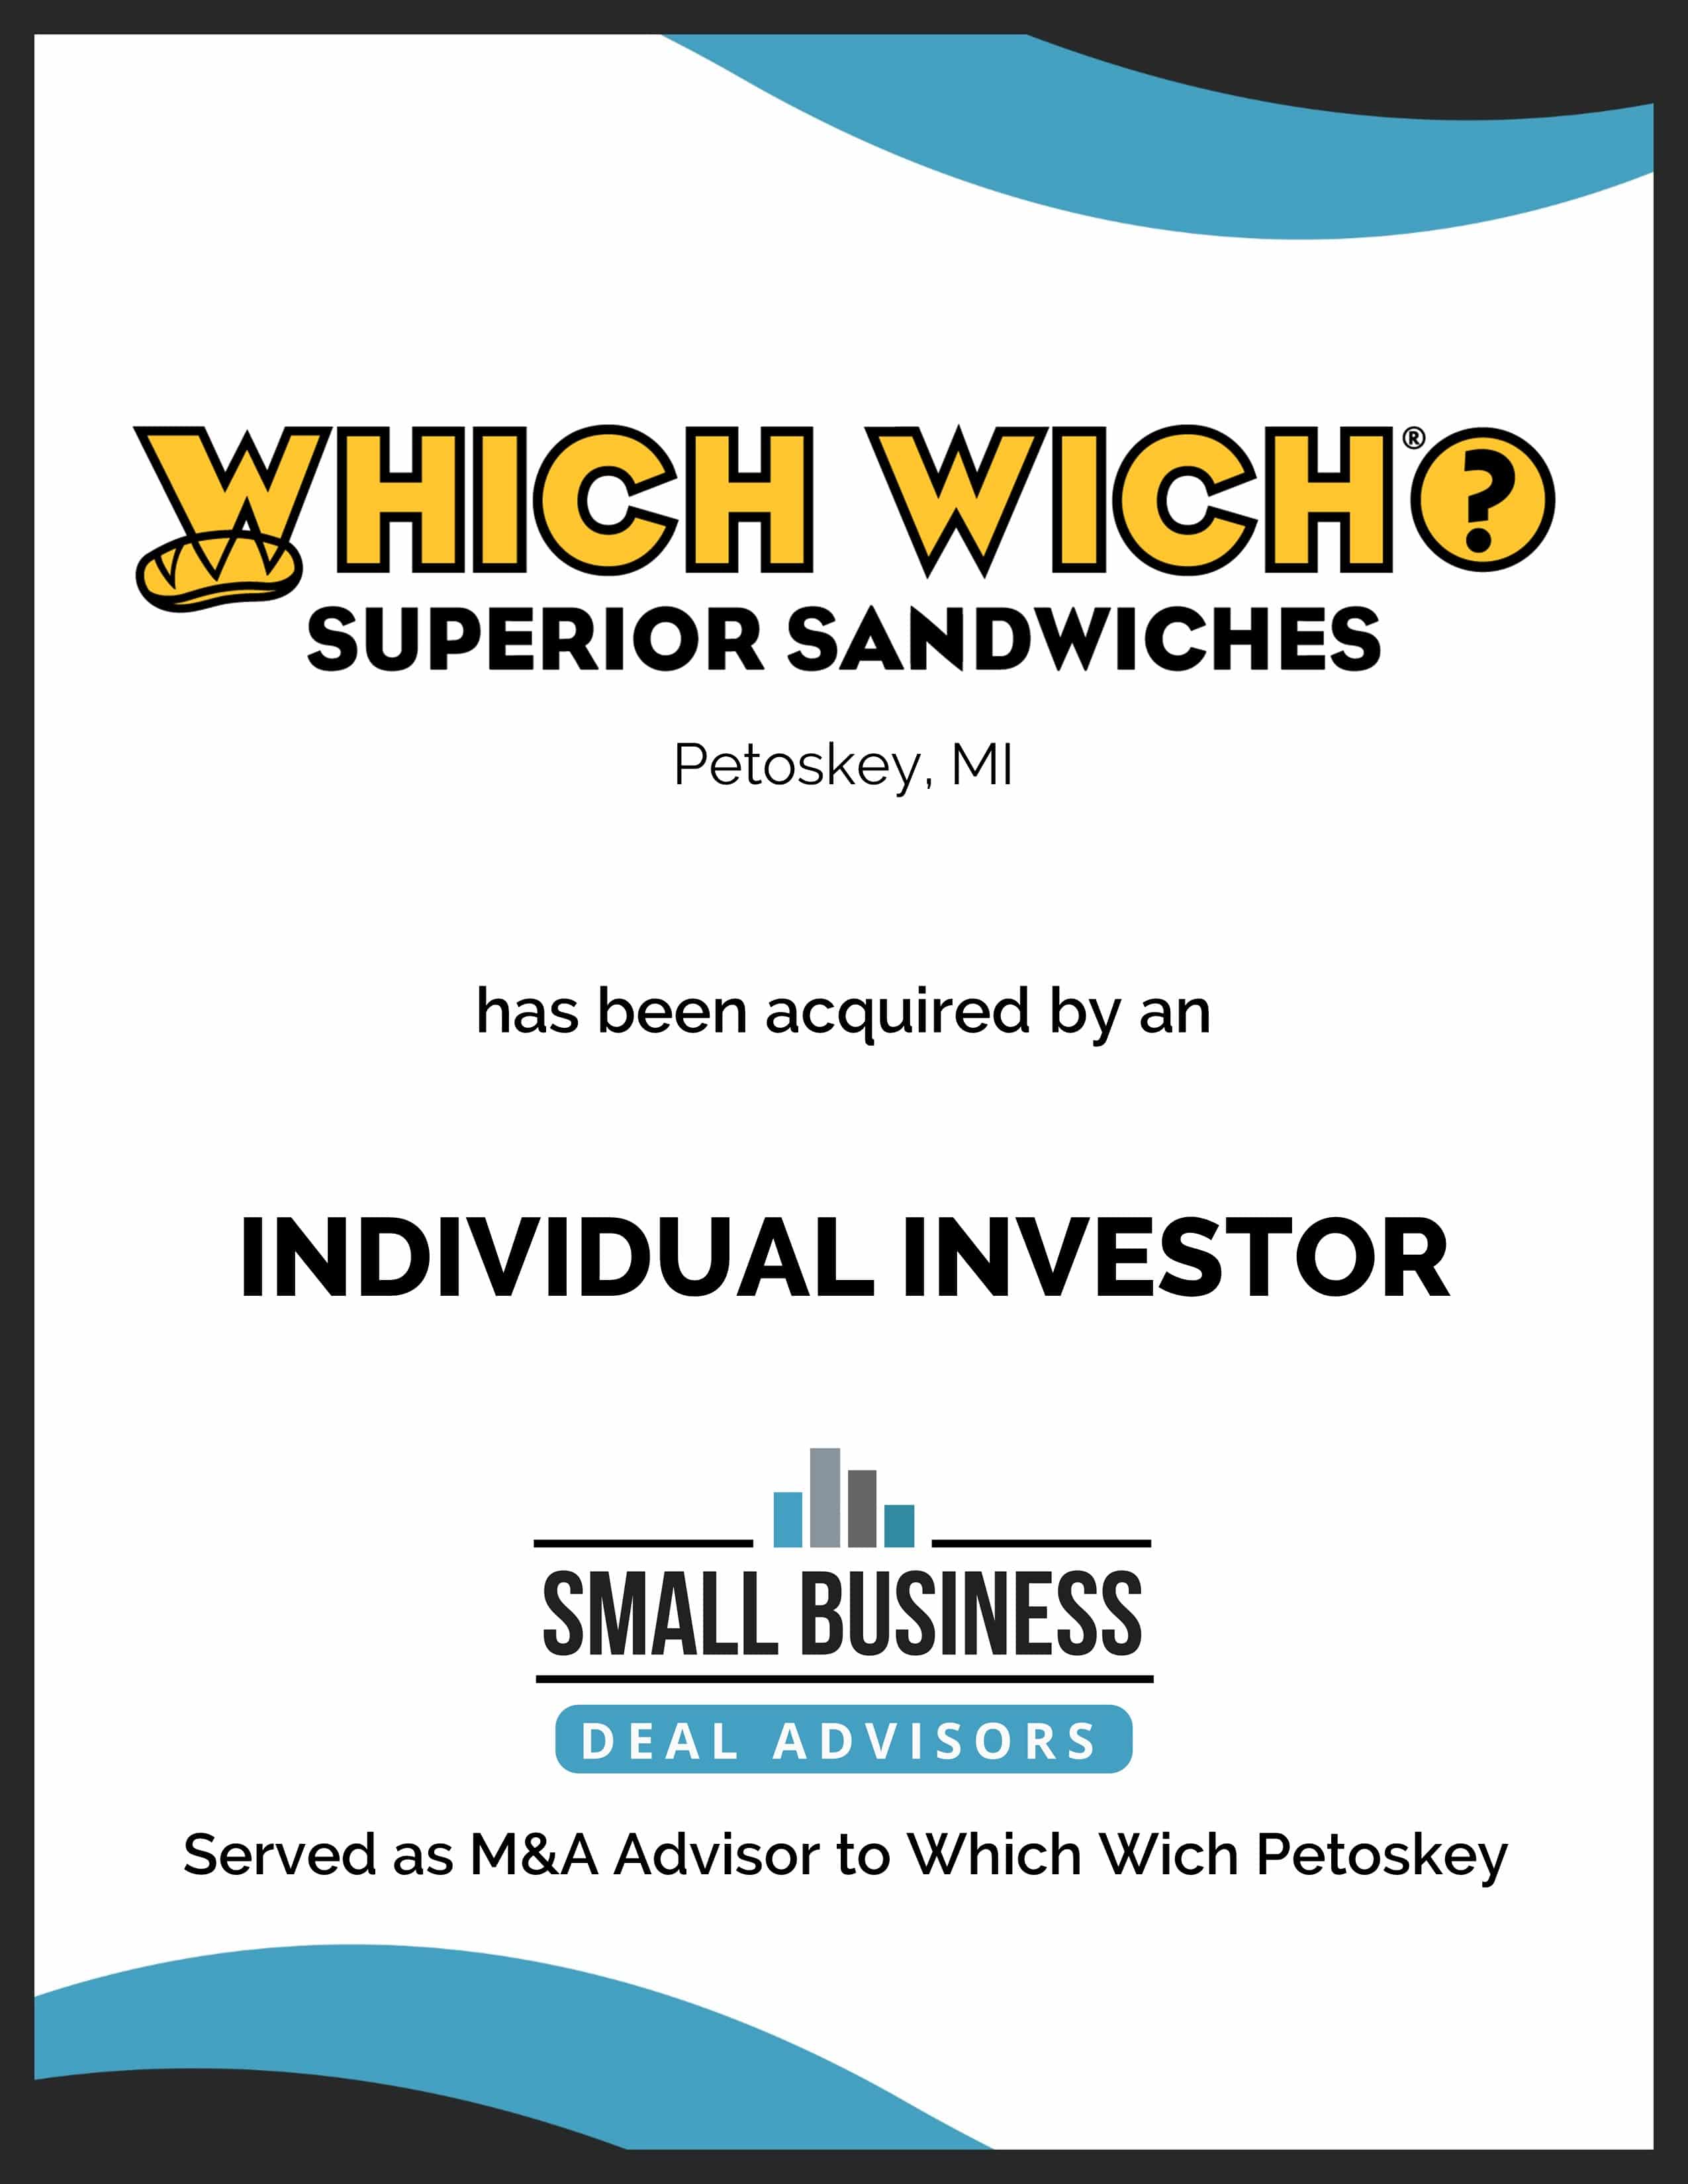 Which Wich Petoskey Sold to an Individual Investor